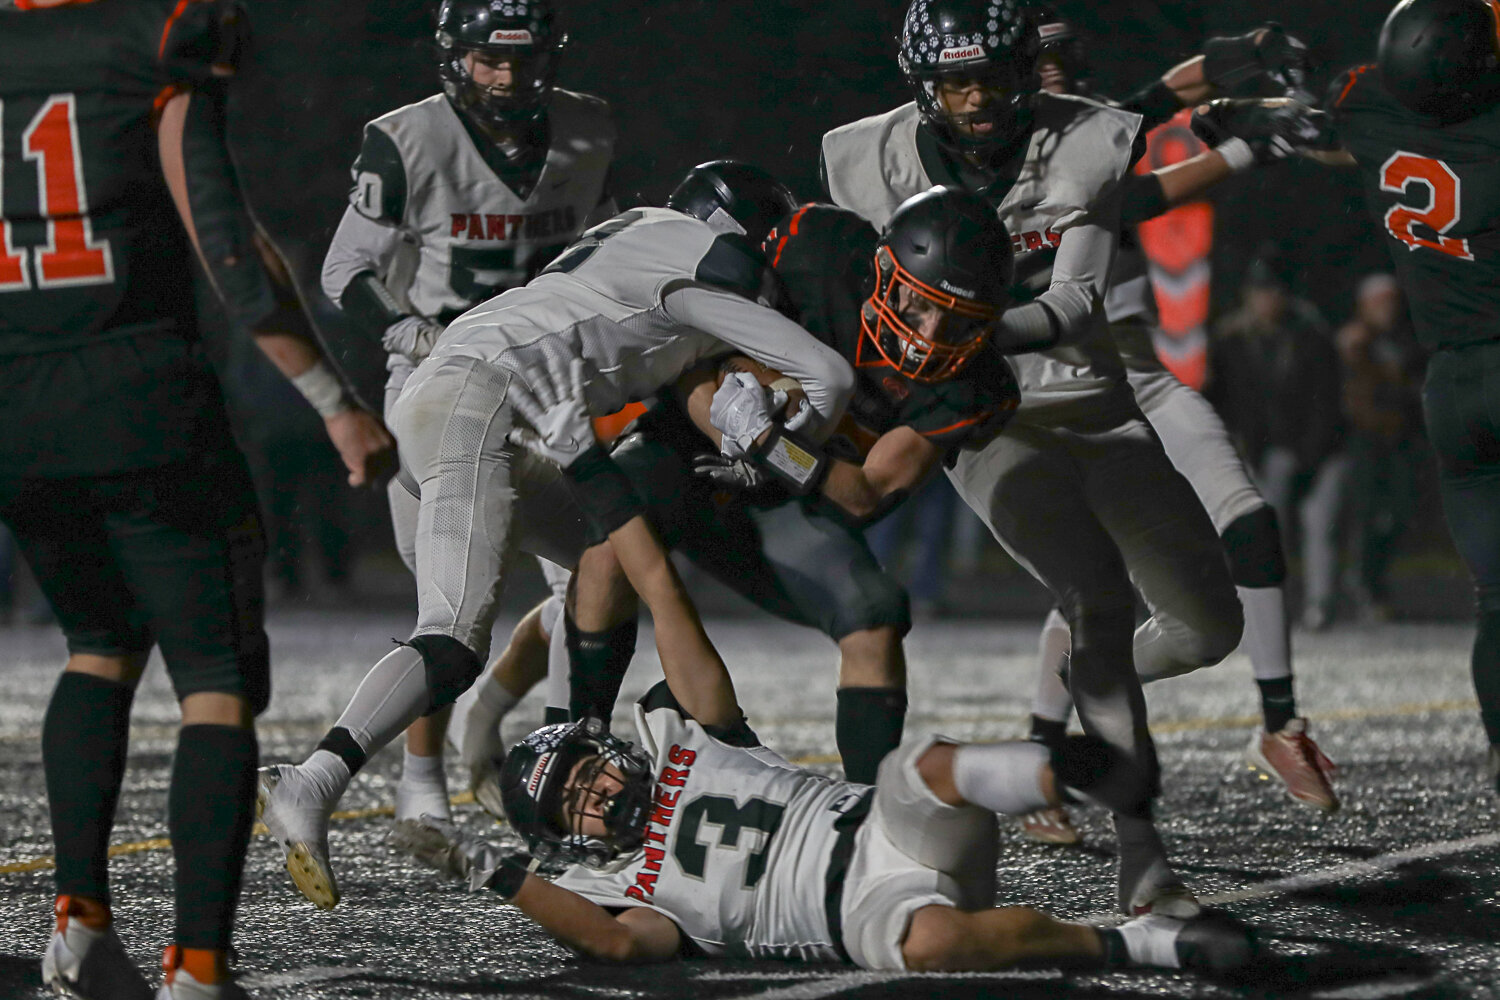 Cayle Kelly runs through defenders during a 43-14 Napavine win over River View on Nov. 18.